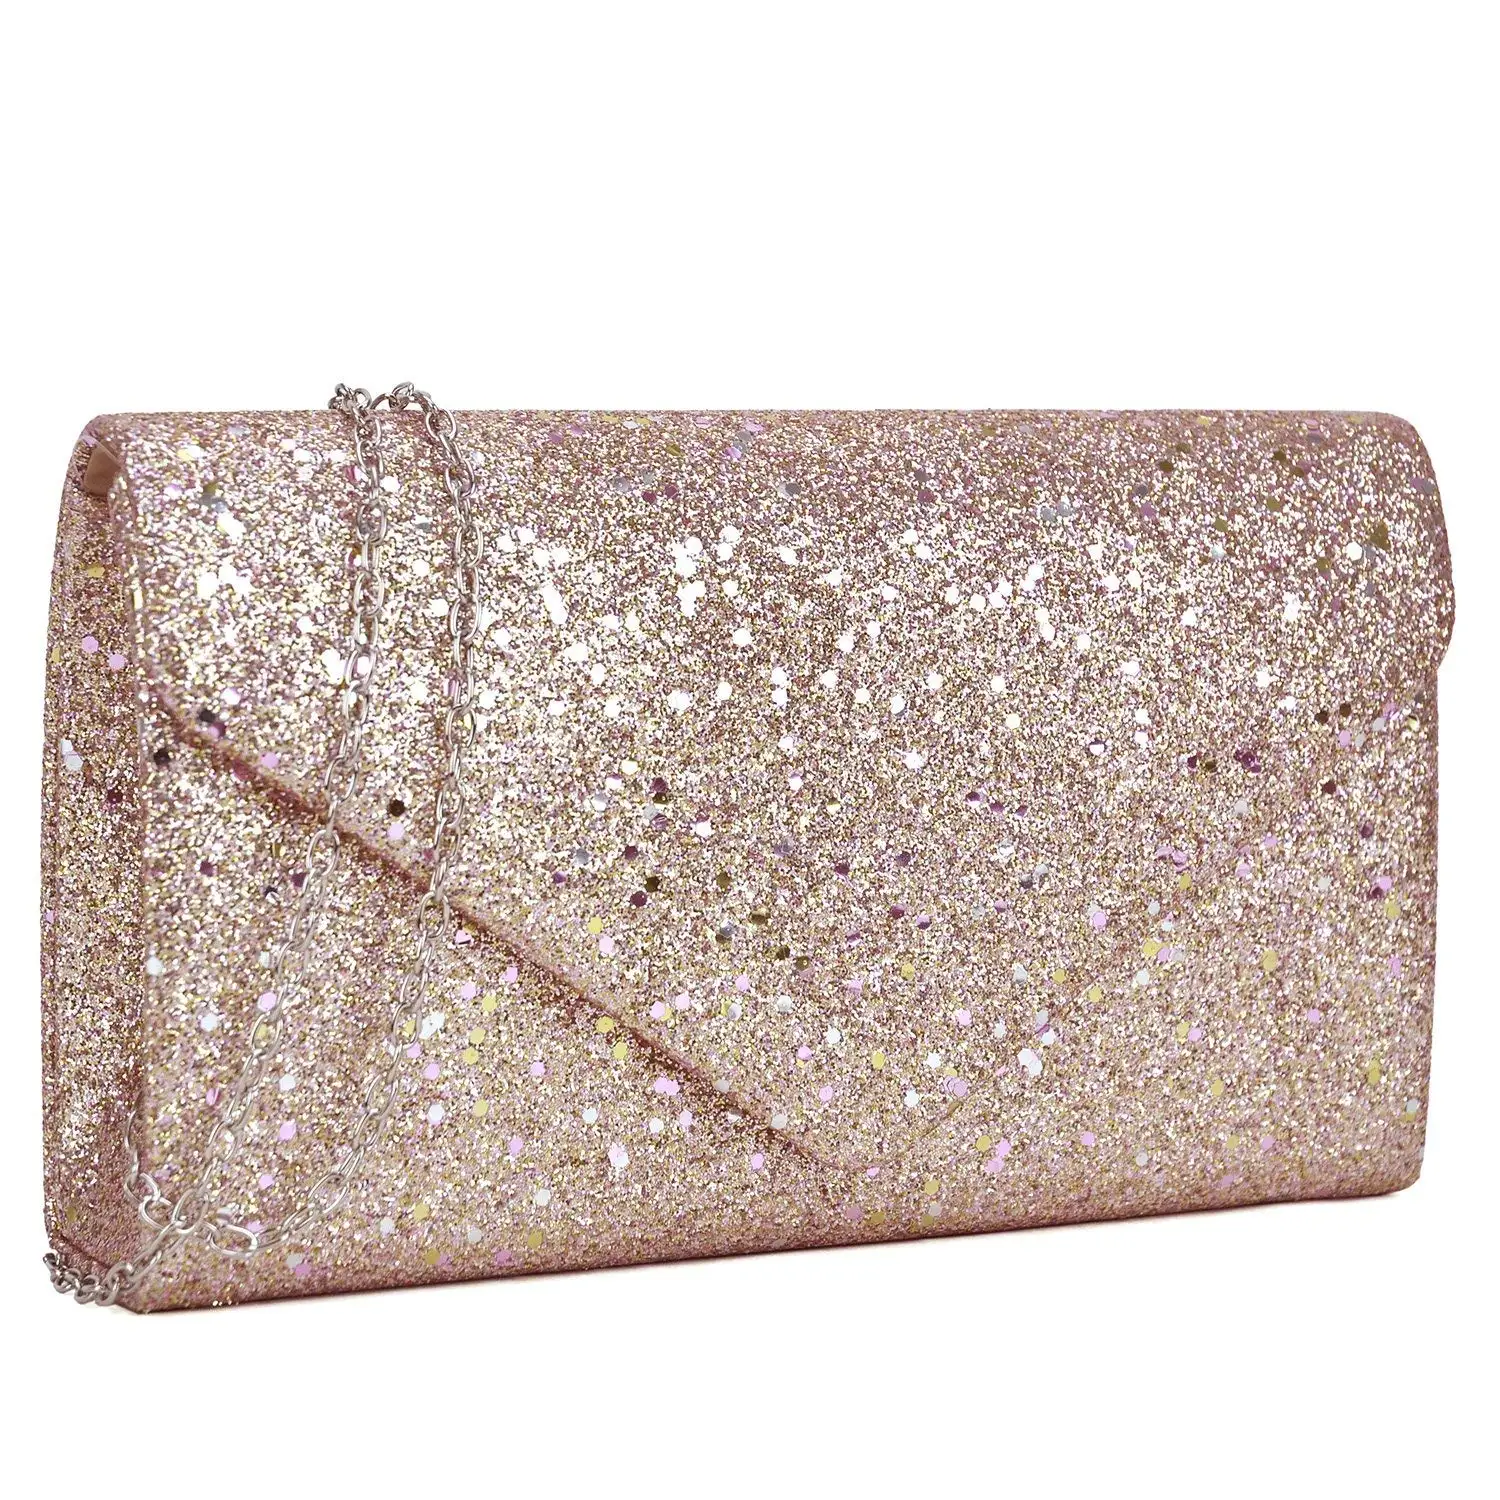 Cheap Prom Purses Clutches, find Prom Purses Clutches deals on line at ...